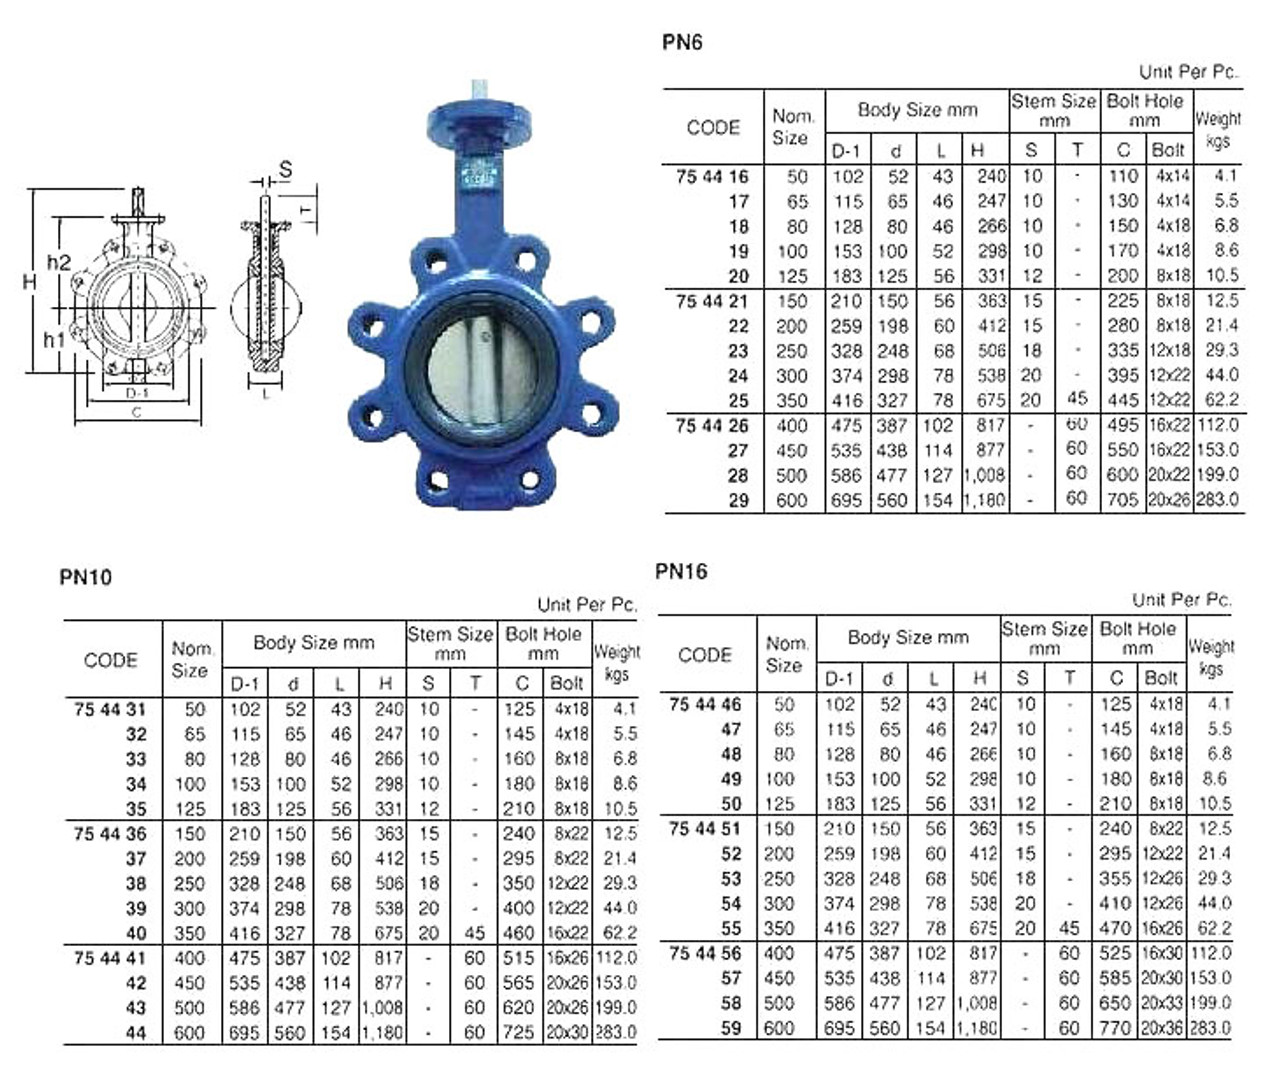 IMPA 754419 Lug Butterfly Valve - Ductile Iron - Bronze Disc - NBR Seat - DIN PN6 - lever operated 100